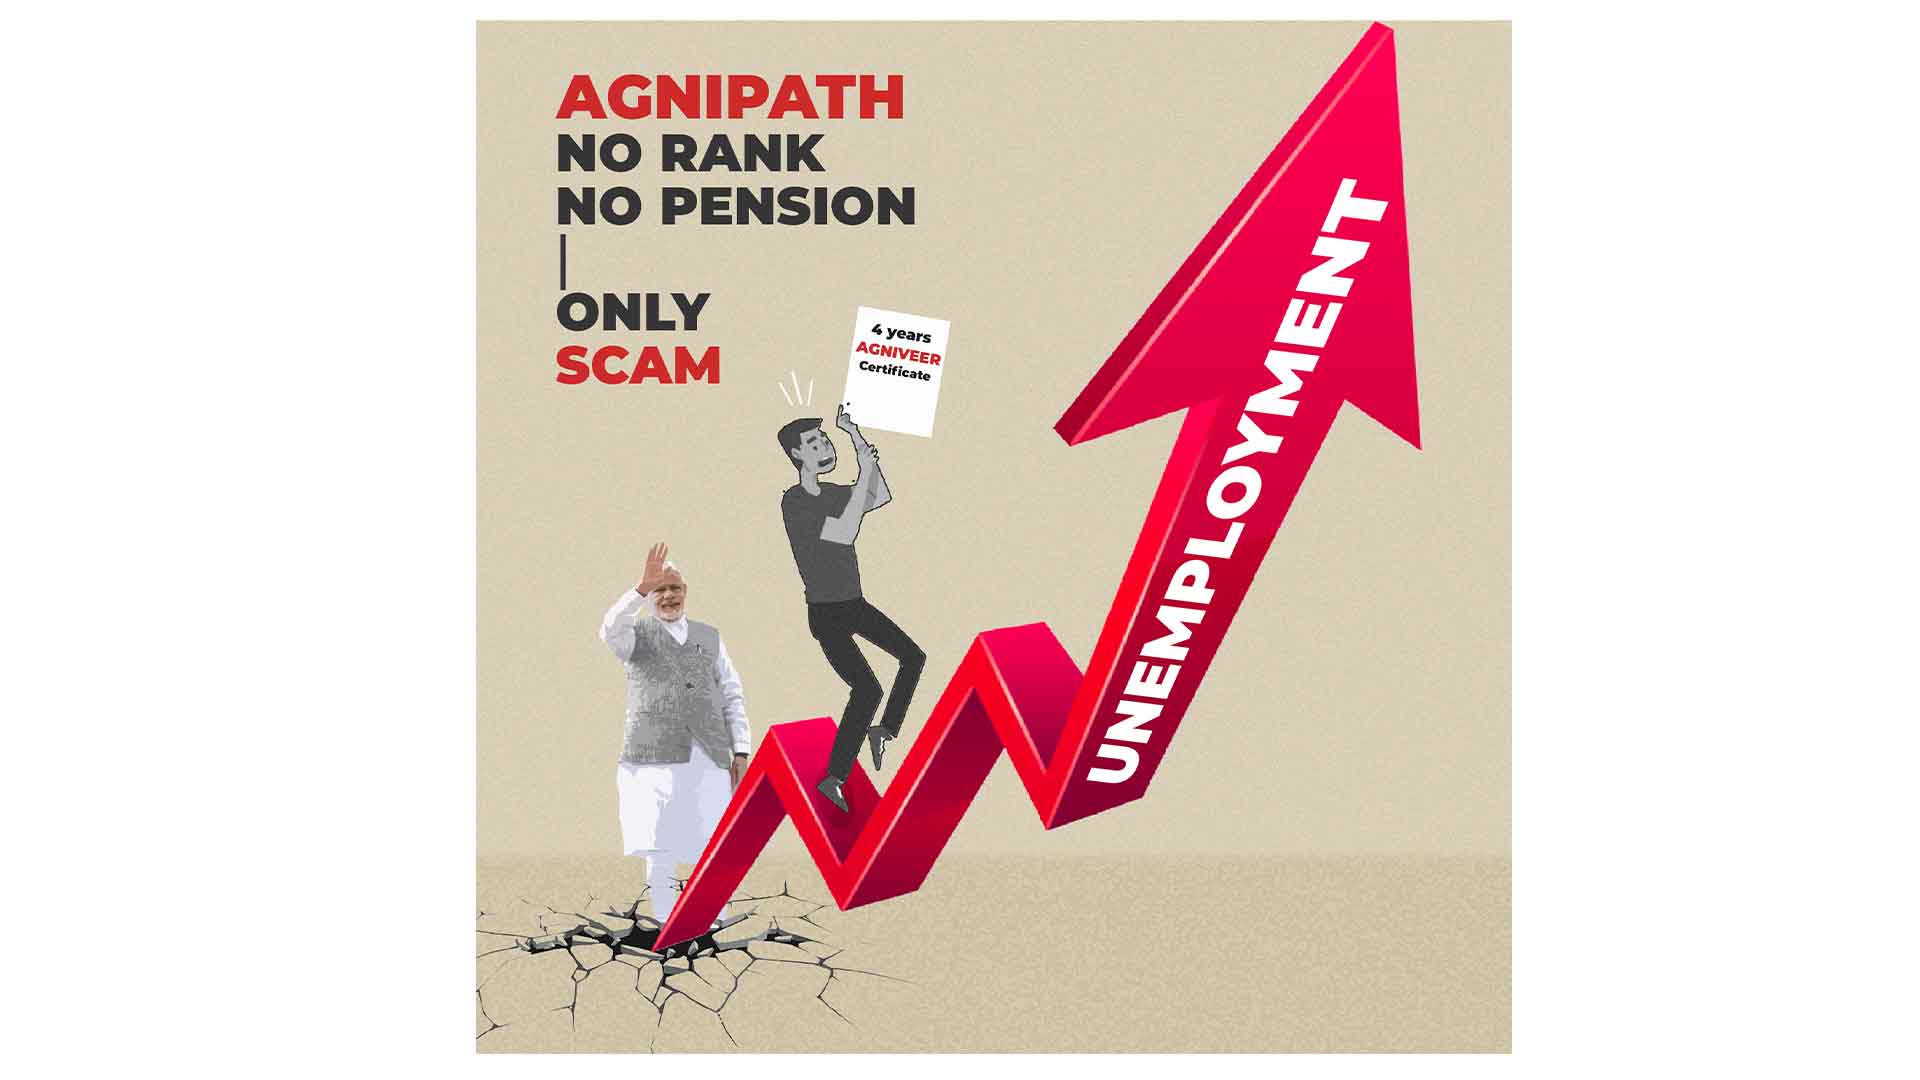 Agnipath Is A Retirement Scheme And Recruitment Scam! | Communist Party of India (Marxist-Leninist) Liberation